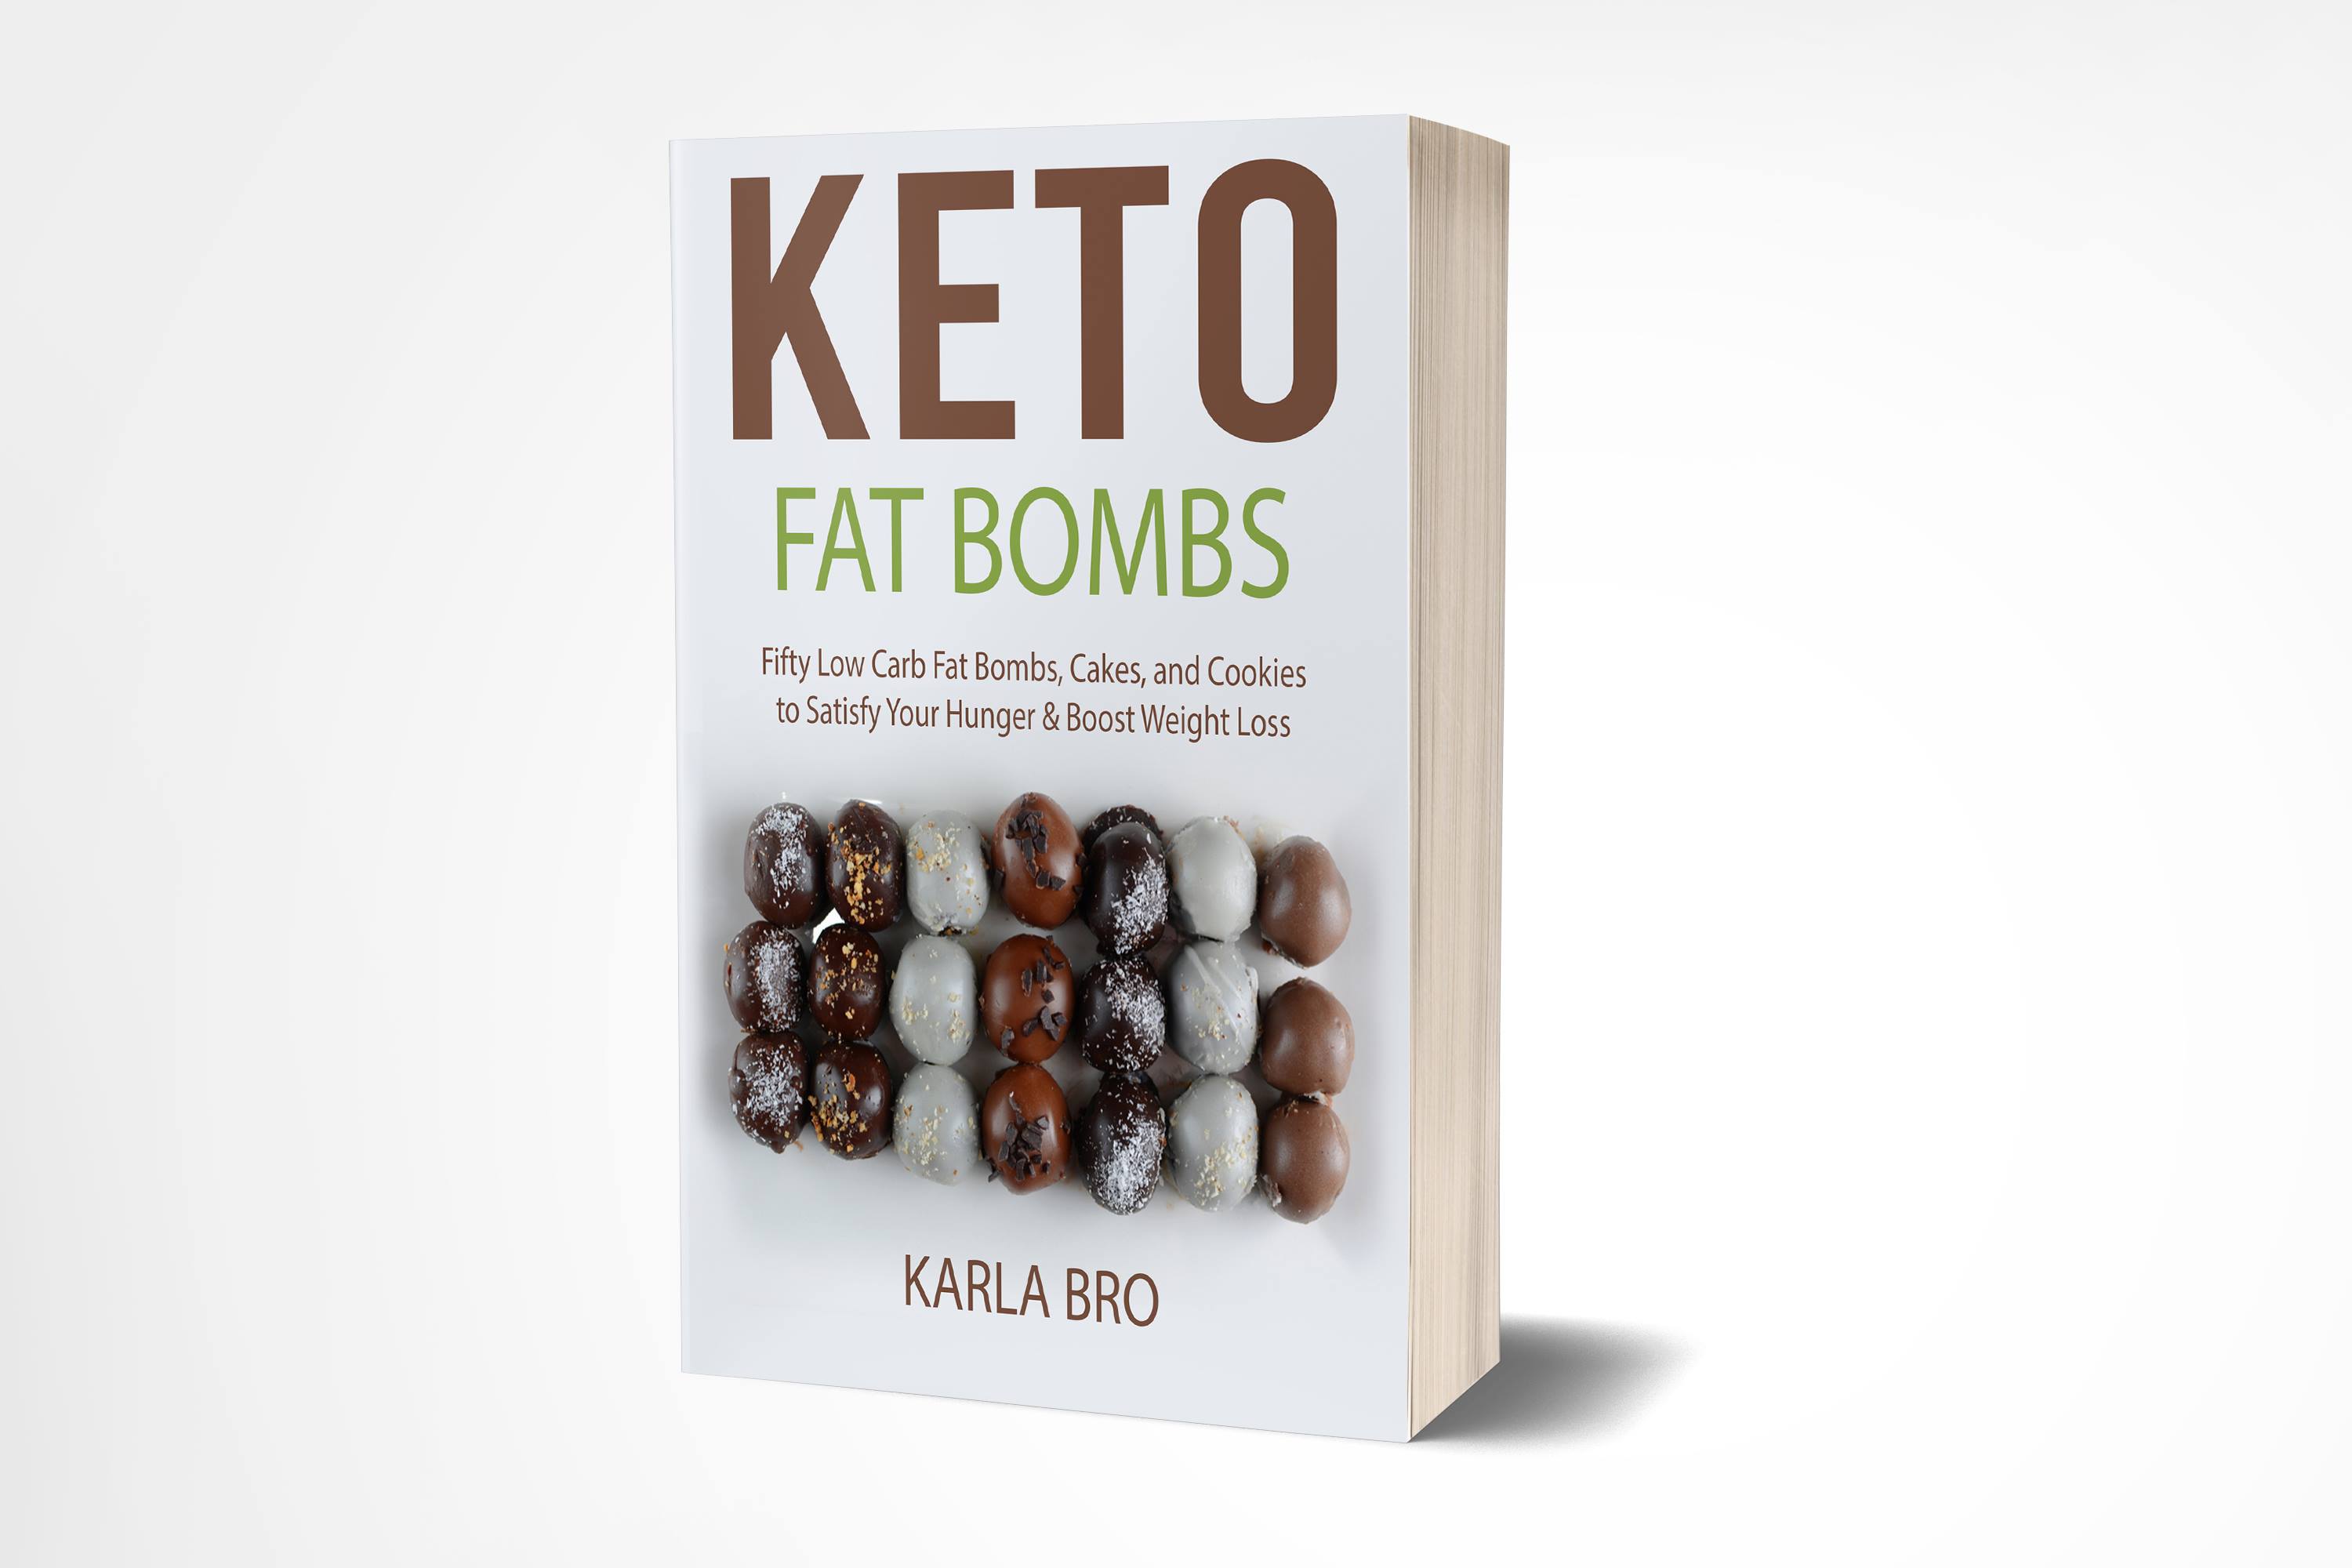 FREE: Keto Fat Bombs: Fifty Low Carb Fat Bombs, Cakes, and Cookies to Satisfy Your Hunger by Karla Bro